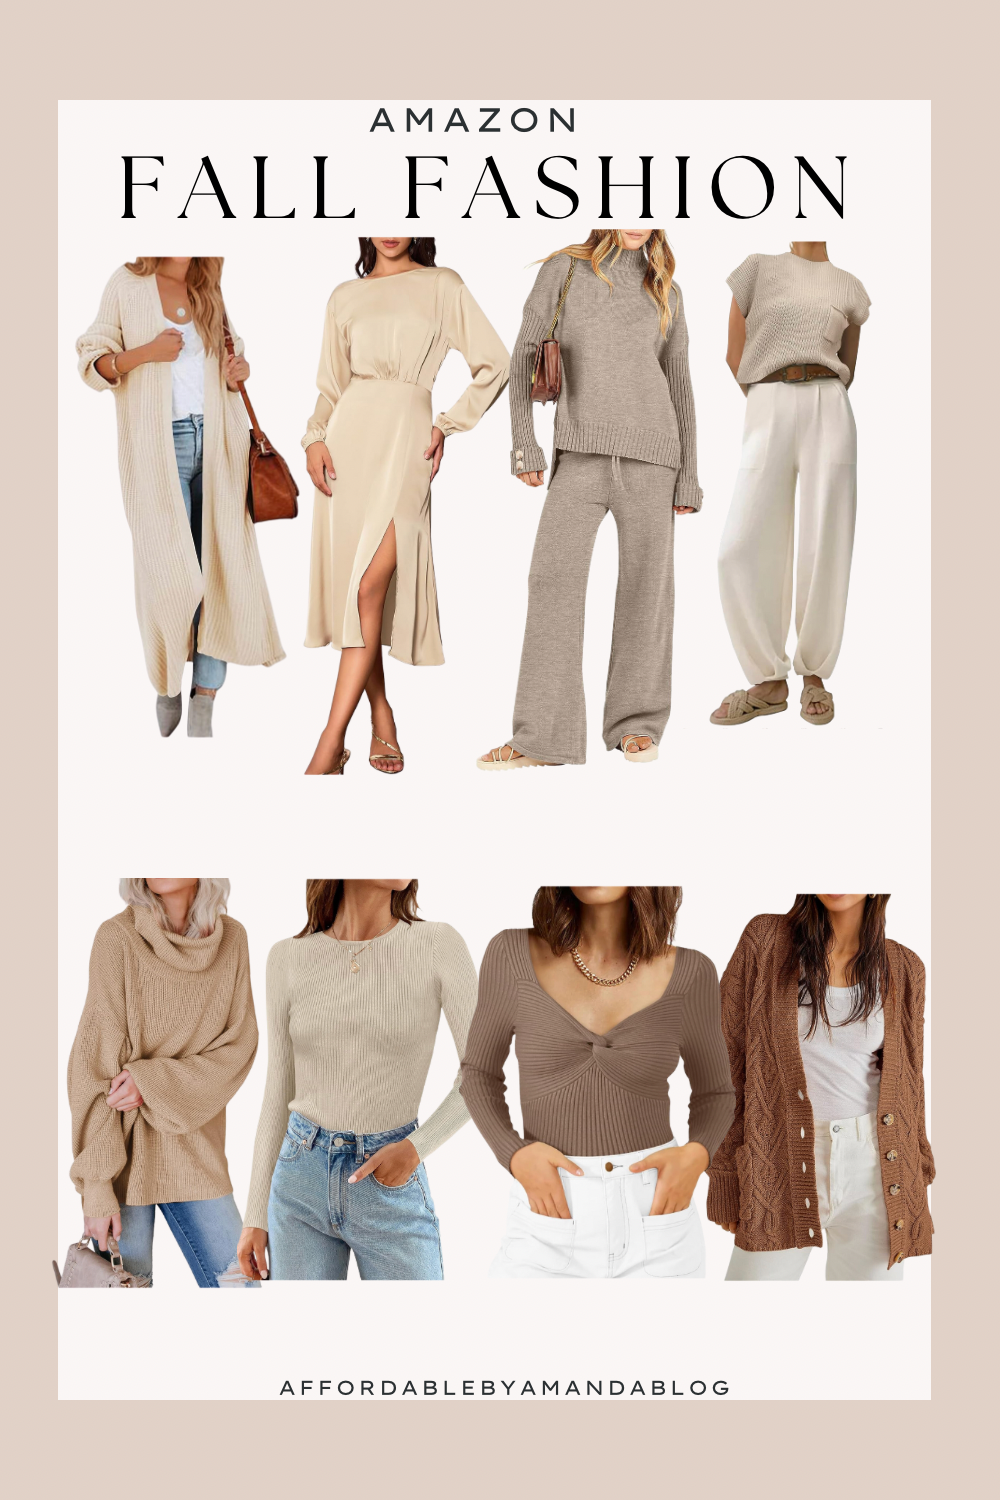 Women's Fall Fashion on Amazon - Amazon Fall Outfit Ideas 2023 - Best Amazon Fashion Finds for Fall 2023 - Affordable by Amanda